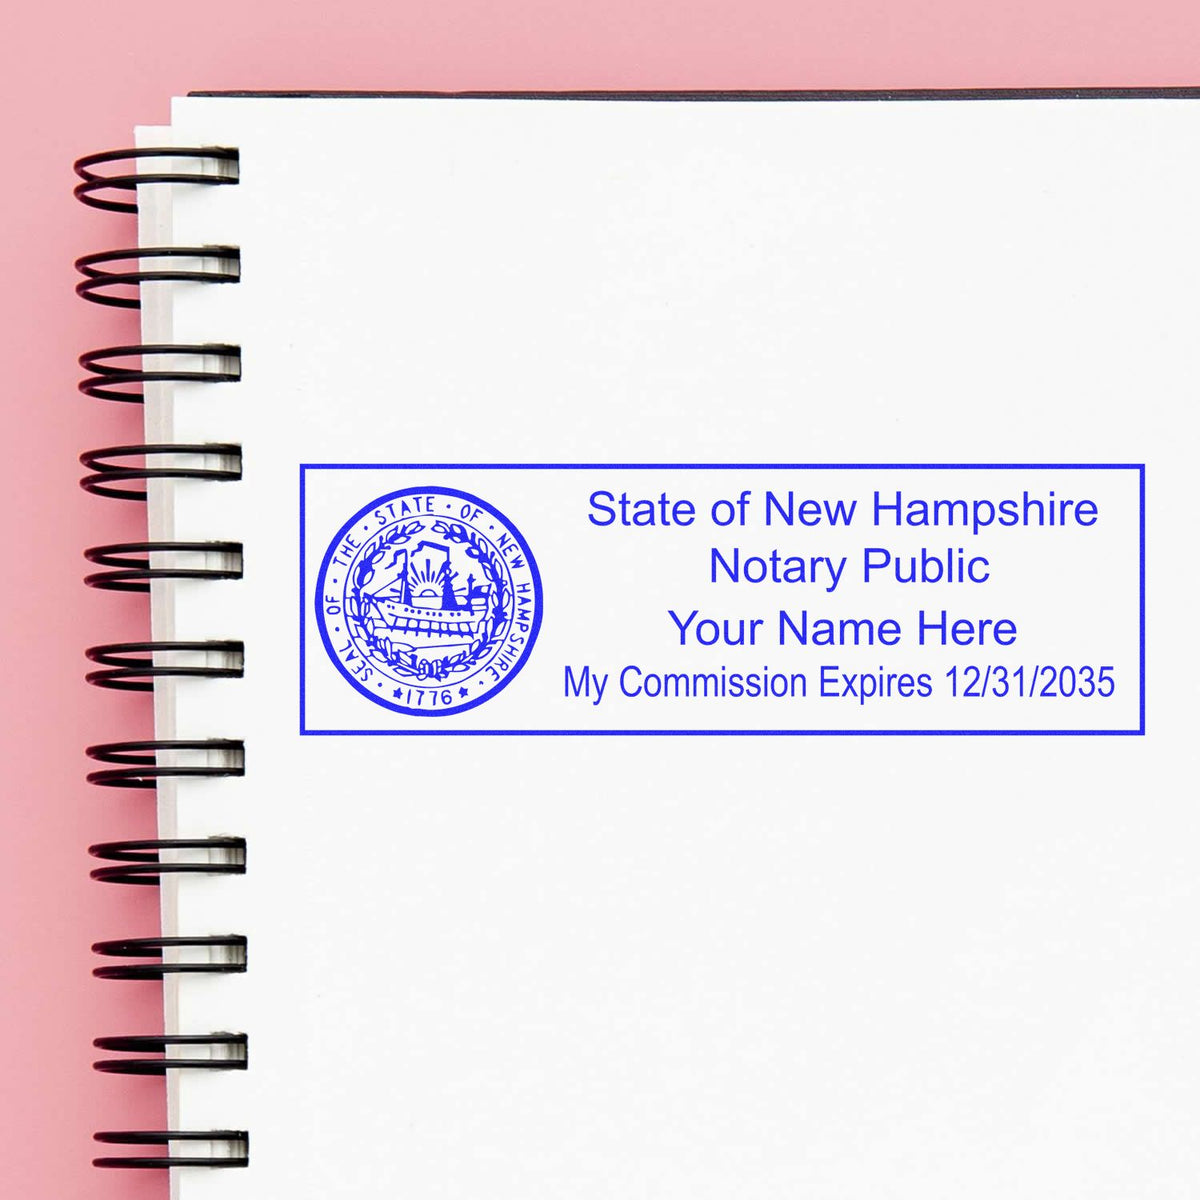 A stamped impression of the MaxLight Premium Pre-Inked New Hampshire State Seal Notarial Stamp in this stylish lifestyle photo, setting the tone for a unique and personalized product.